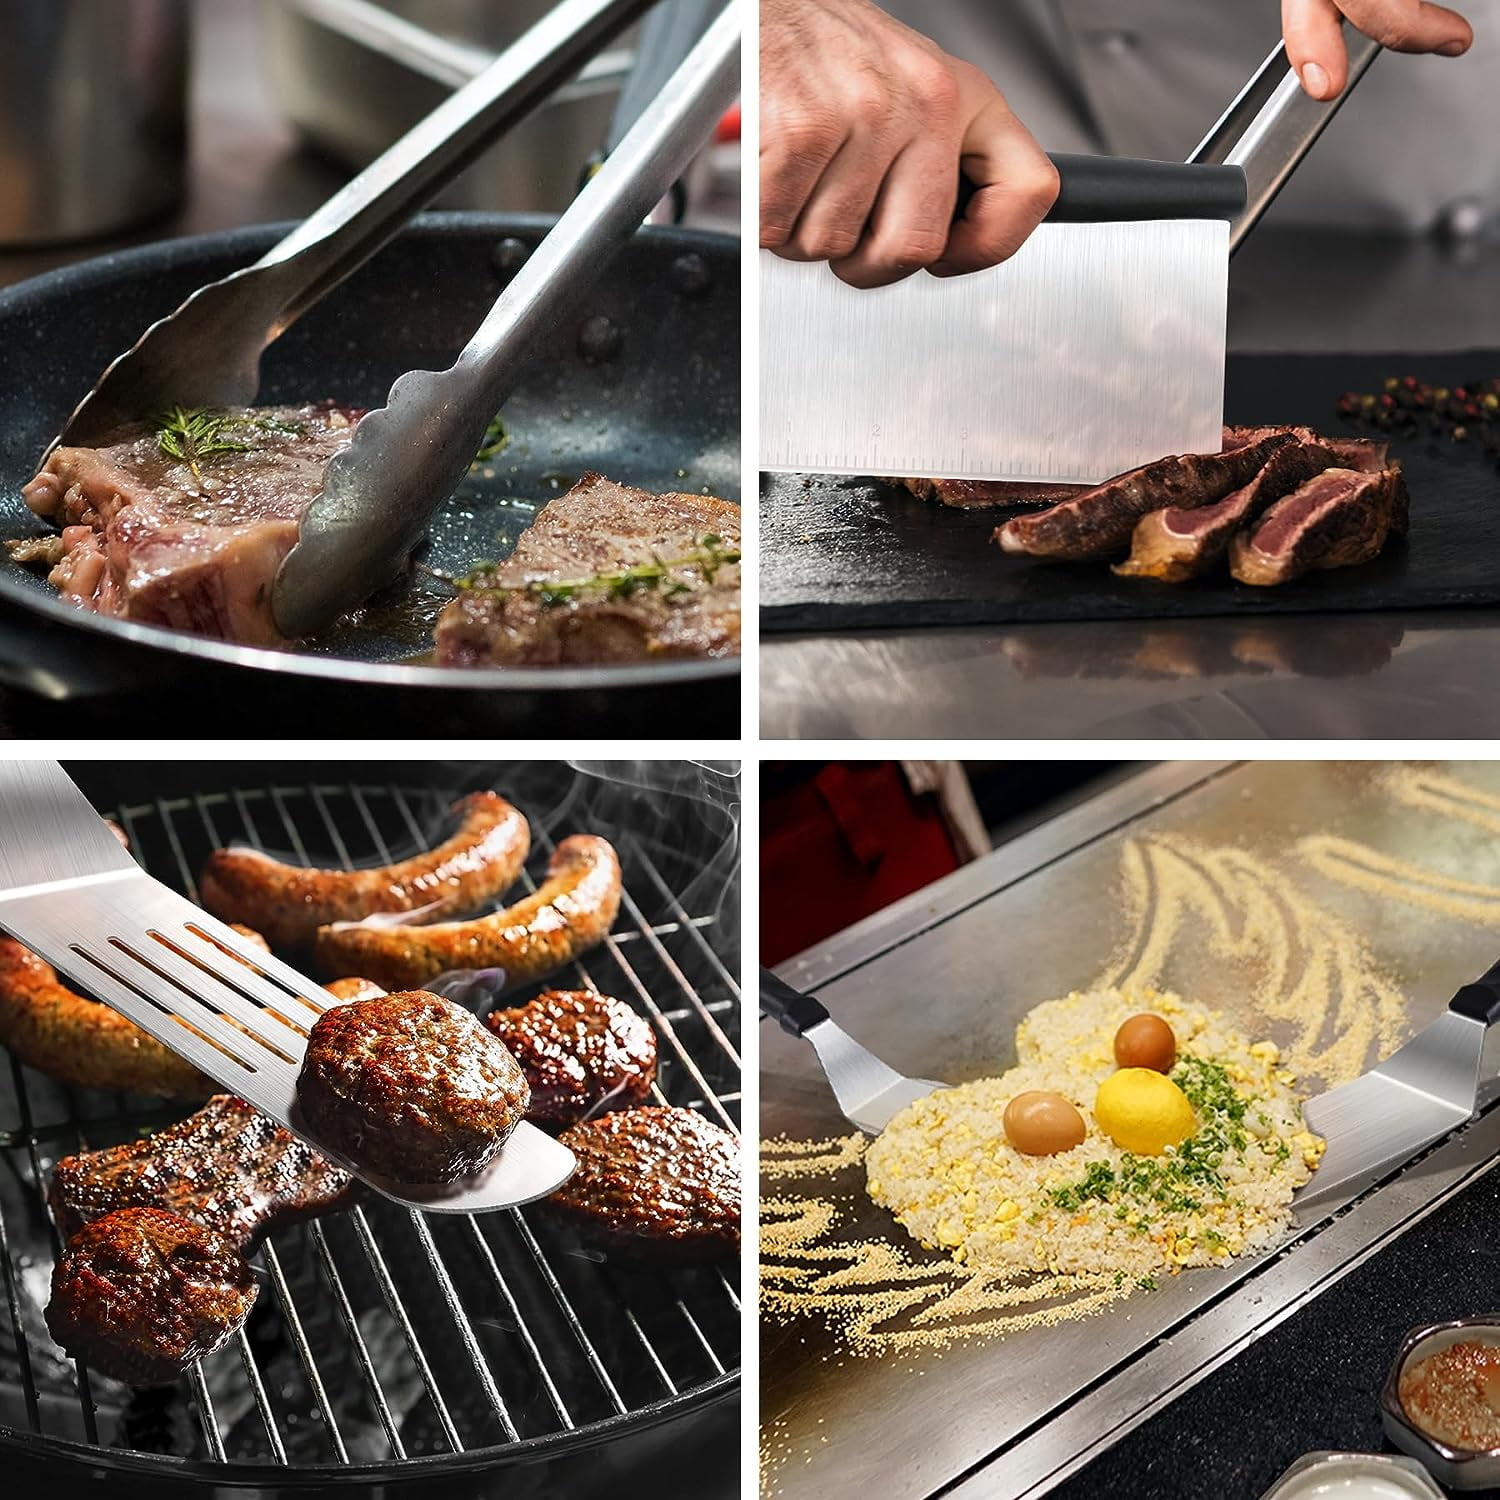 TENLEI BBQ Grill Tools Set,Grilling Accessories,Extra Thick Stainless Steel  Grill Spatula, Tongs,Fork,Meat Knife,Brush & Skewers.Best Grilling Gift